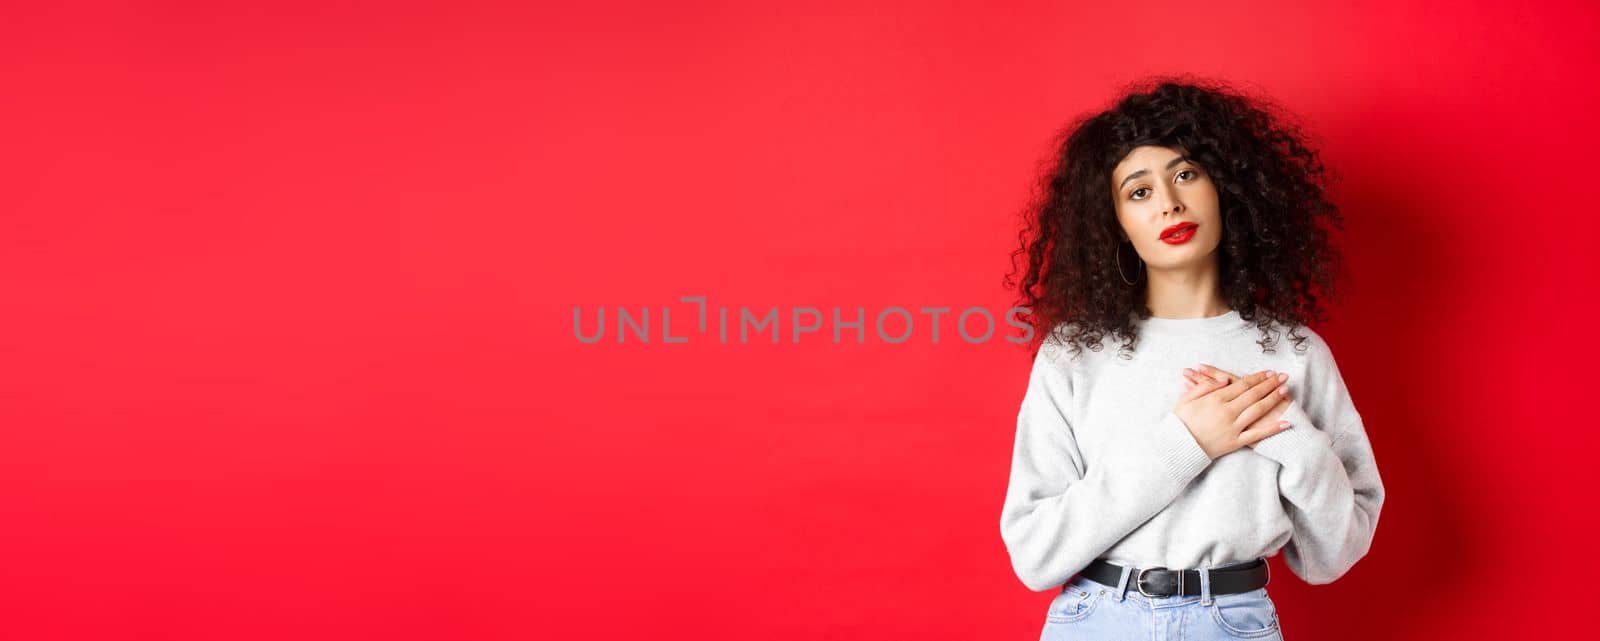 Beautiful woman with curly hair feeling touched and thankful, holding hands on heart and looking with affection at camera, red background.